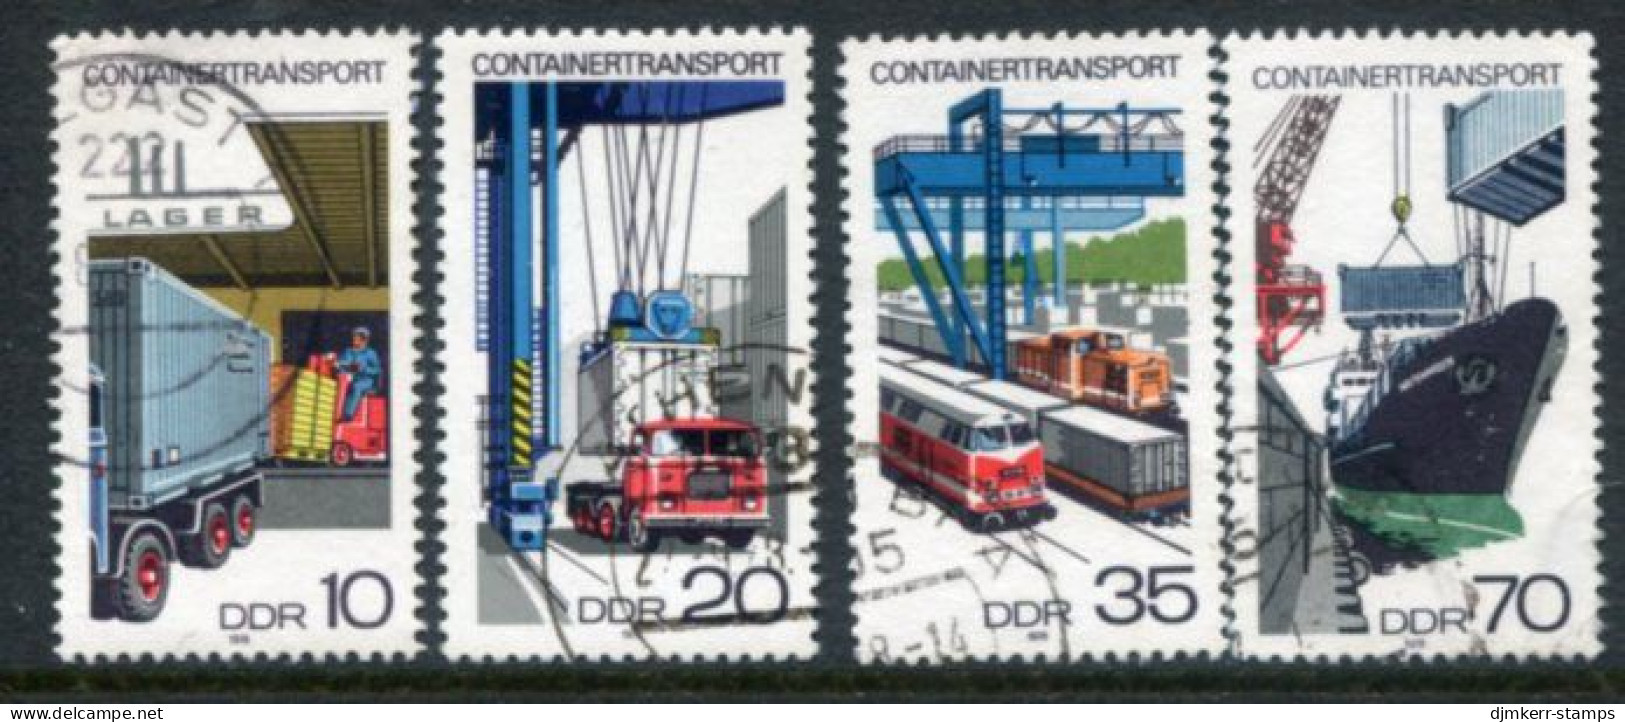 DDR / E. GERMANY 1978 Container Transport Used.  Michel 2326-29 - Used Stamps